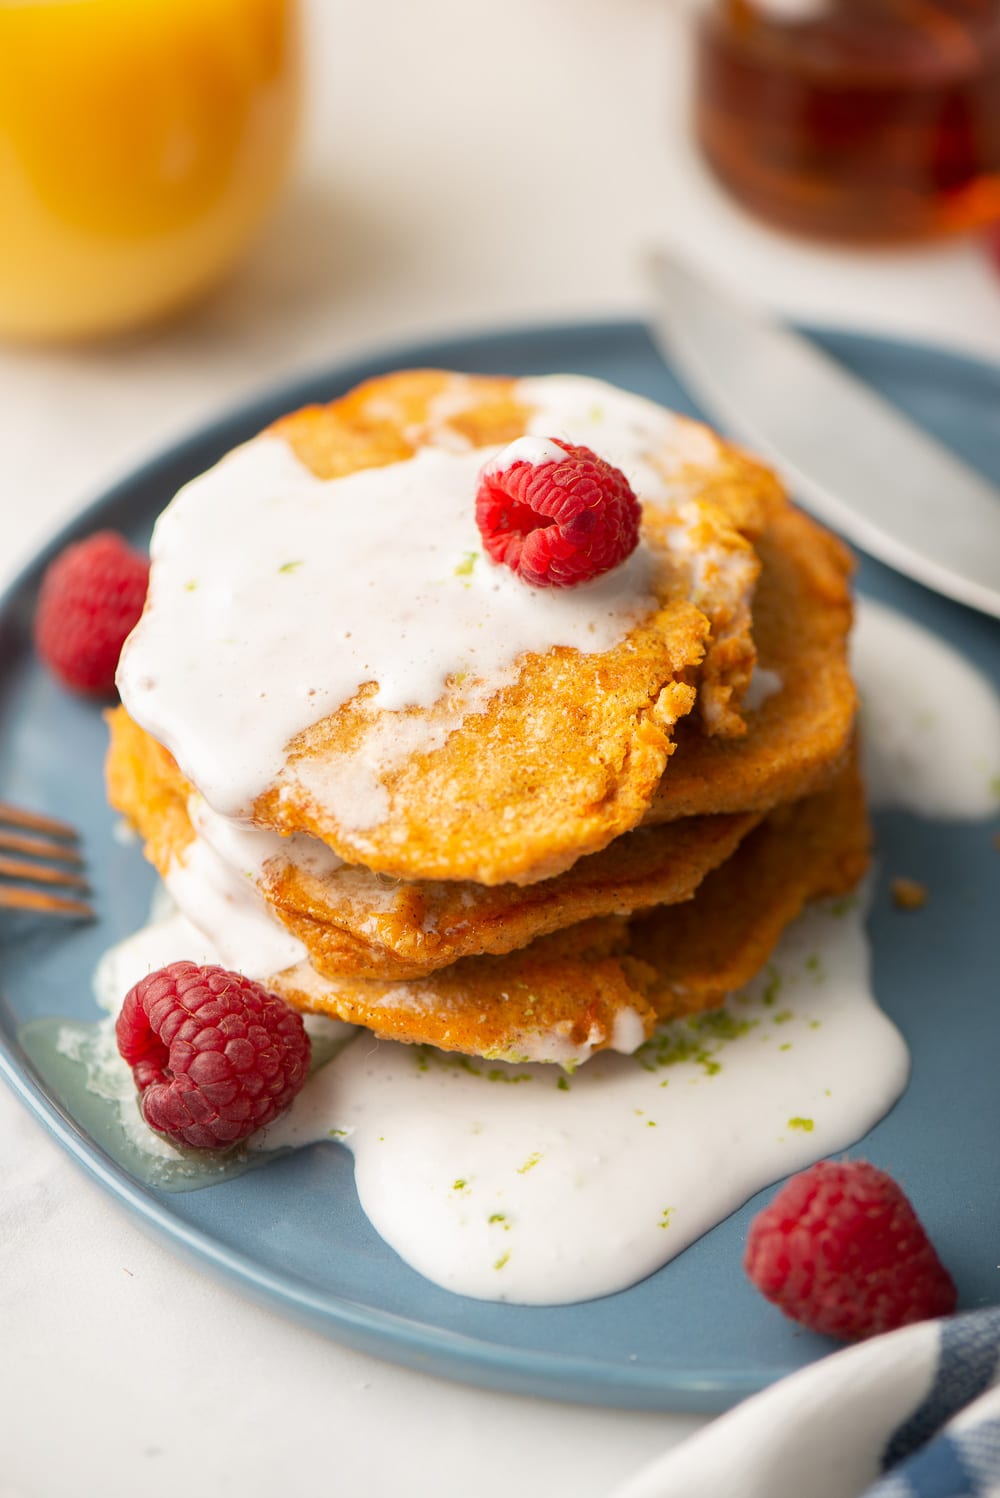 A close-up of a stack of gluten-free sweet potato pancakes topped with coconut-lime whipped cream and some raspberries on a blue plate.